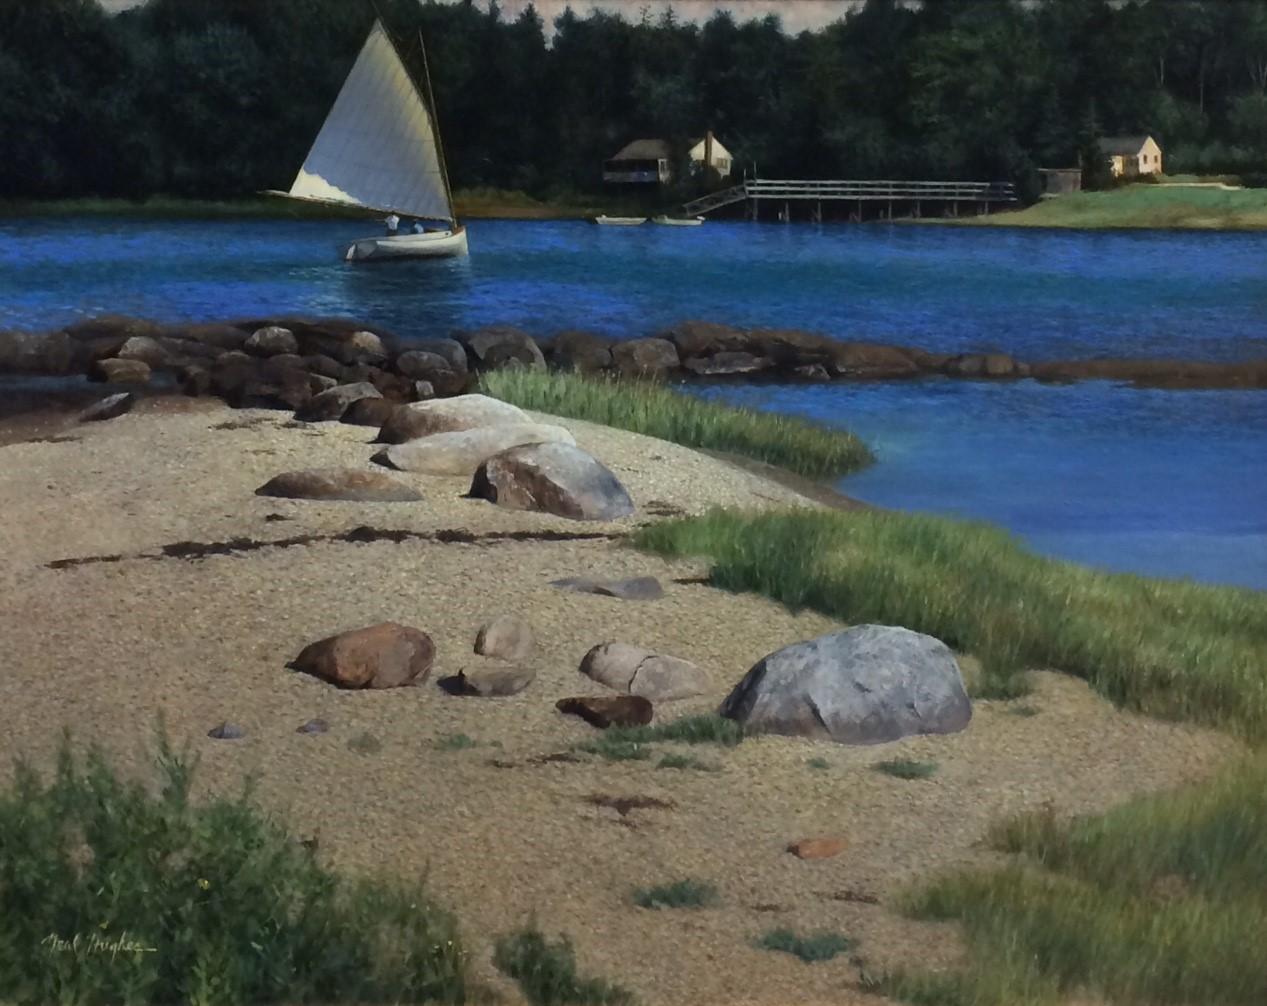 Breezy Afternoon, paysage marin impressionniste original 22x26 - Painting de Neal Hughes